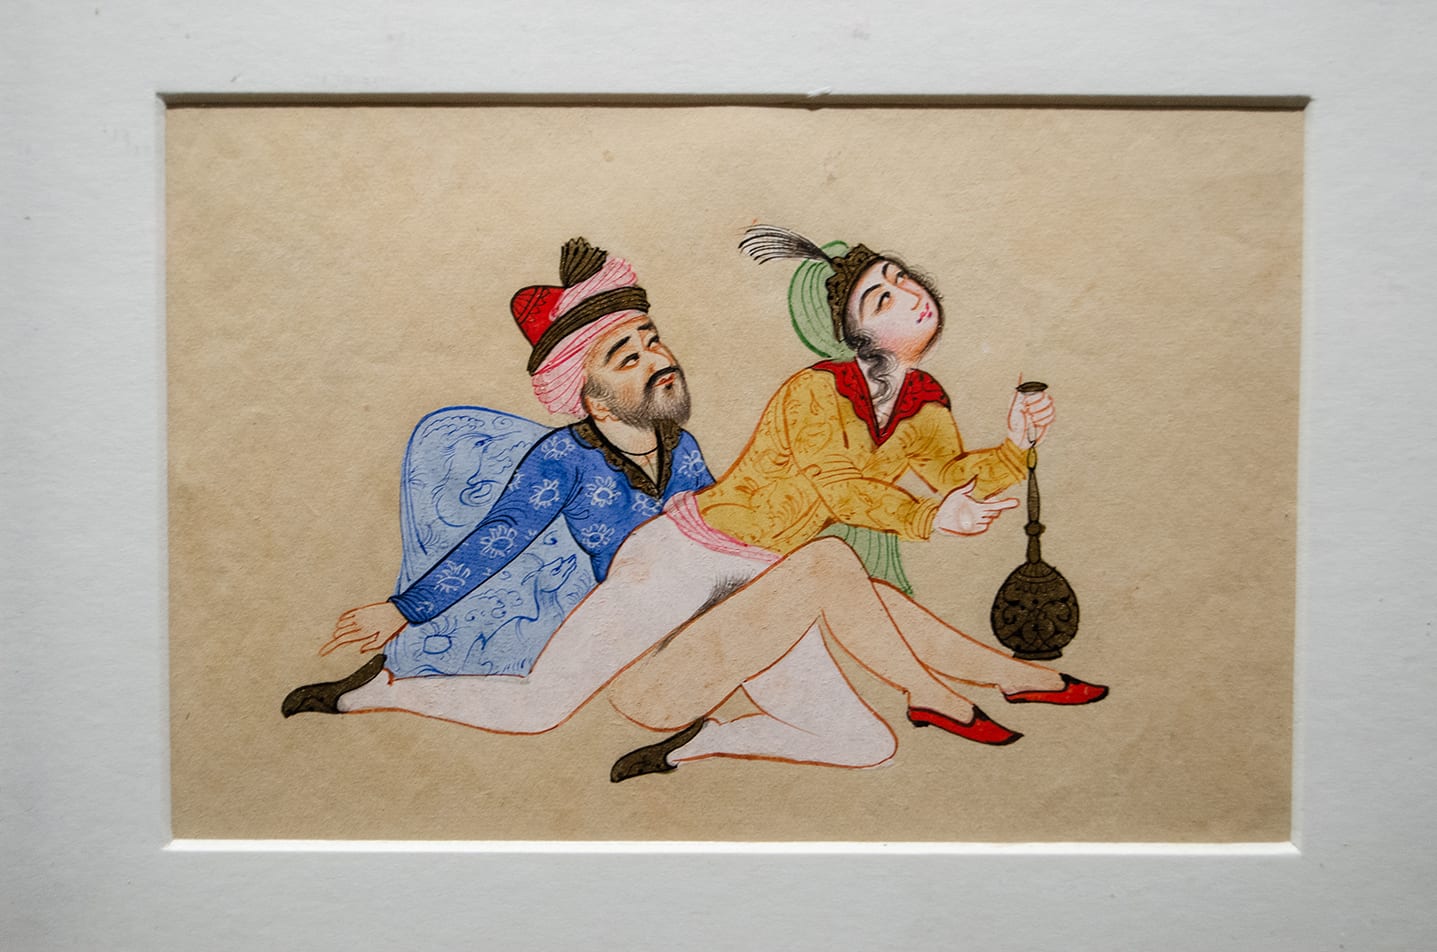 107 - Late Mughal Empire Erotic Manuscript / Painting Inspired by the Kama Sutra, 18th Century CE - 19th Century CE | Barakat Gallery